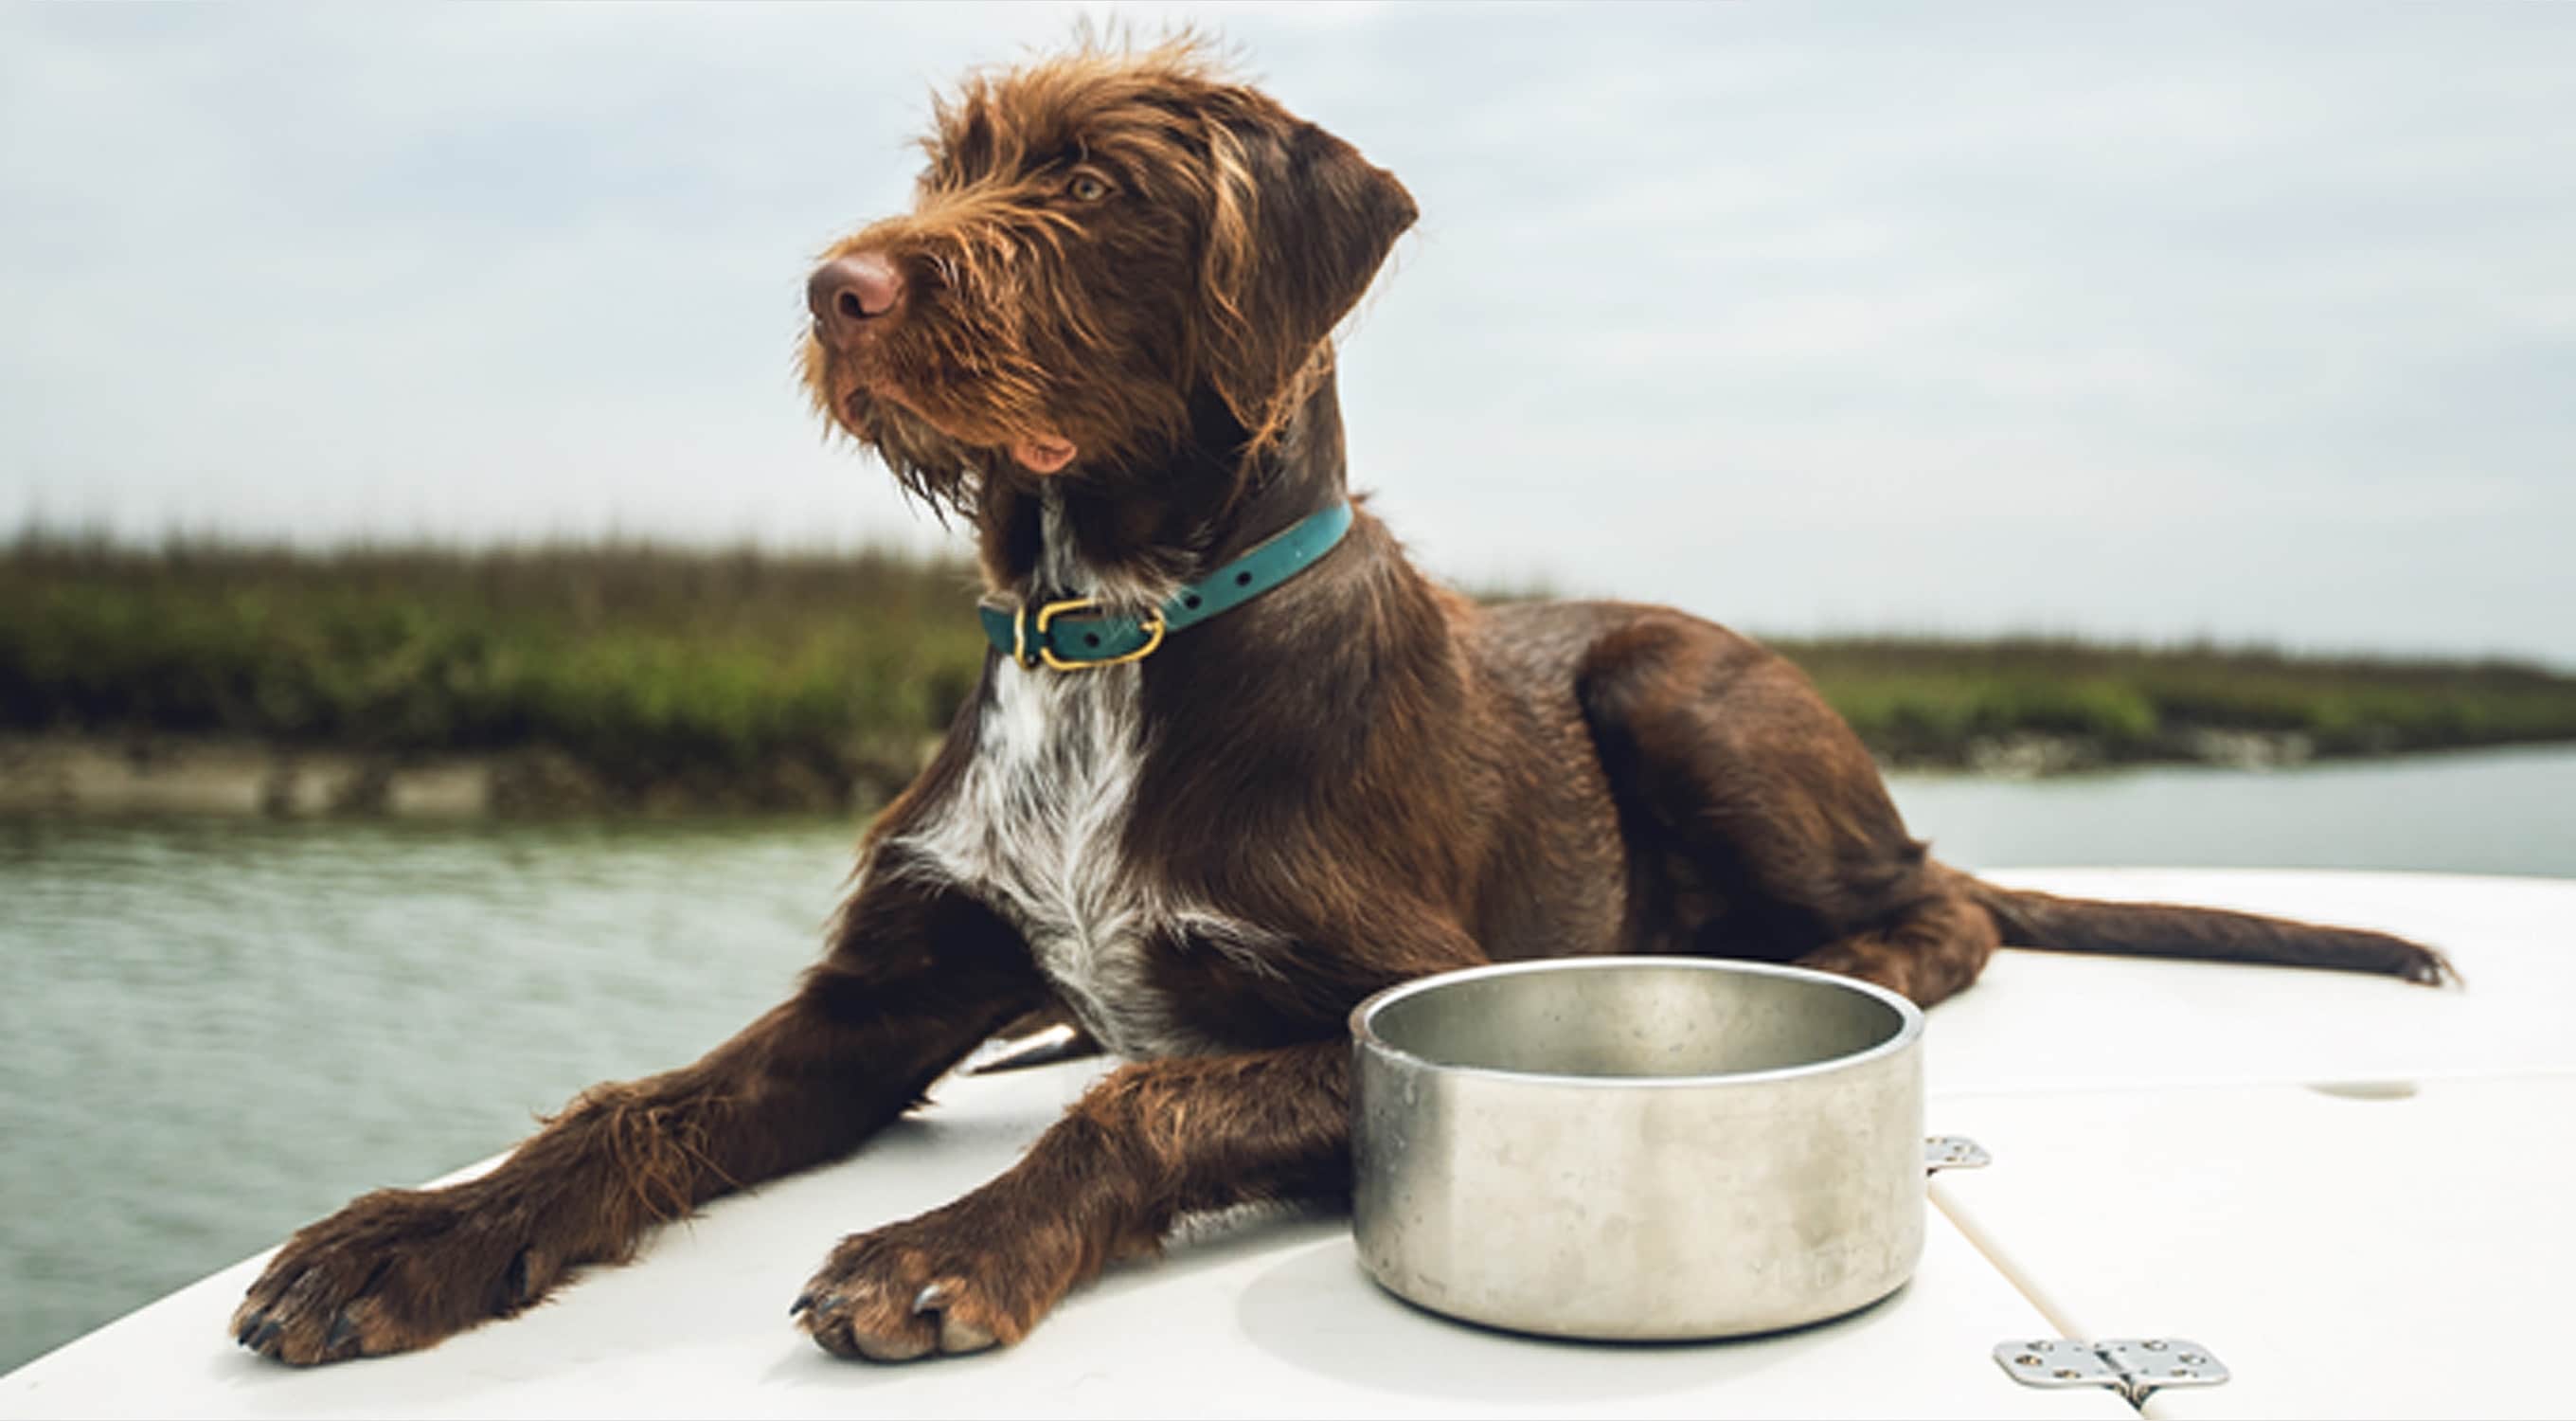 Yeti Dog Bowl Review: Features, Pricing & More (With Personal